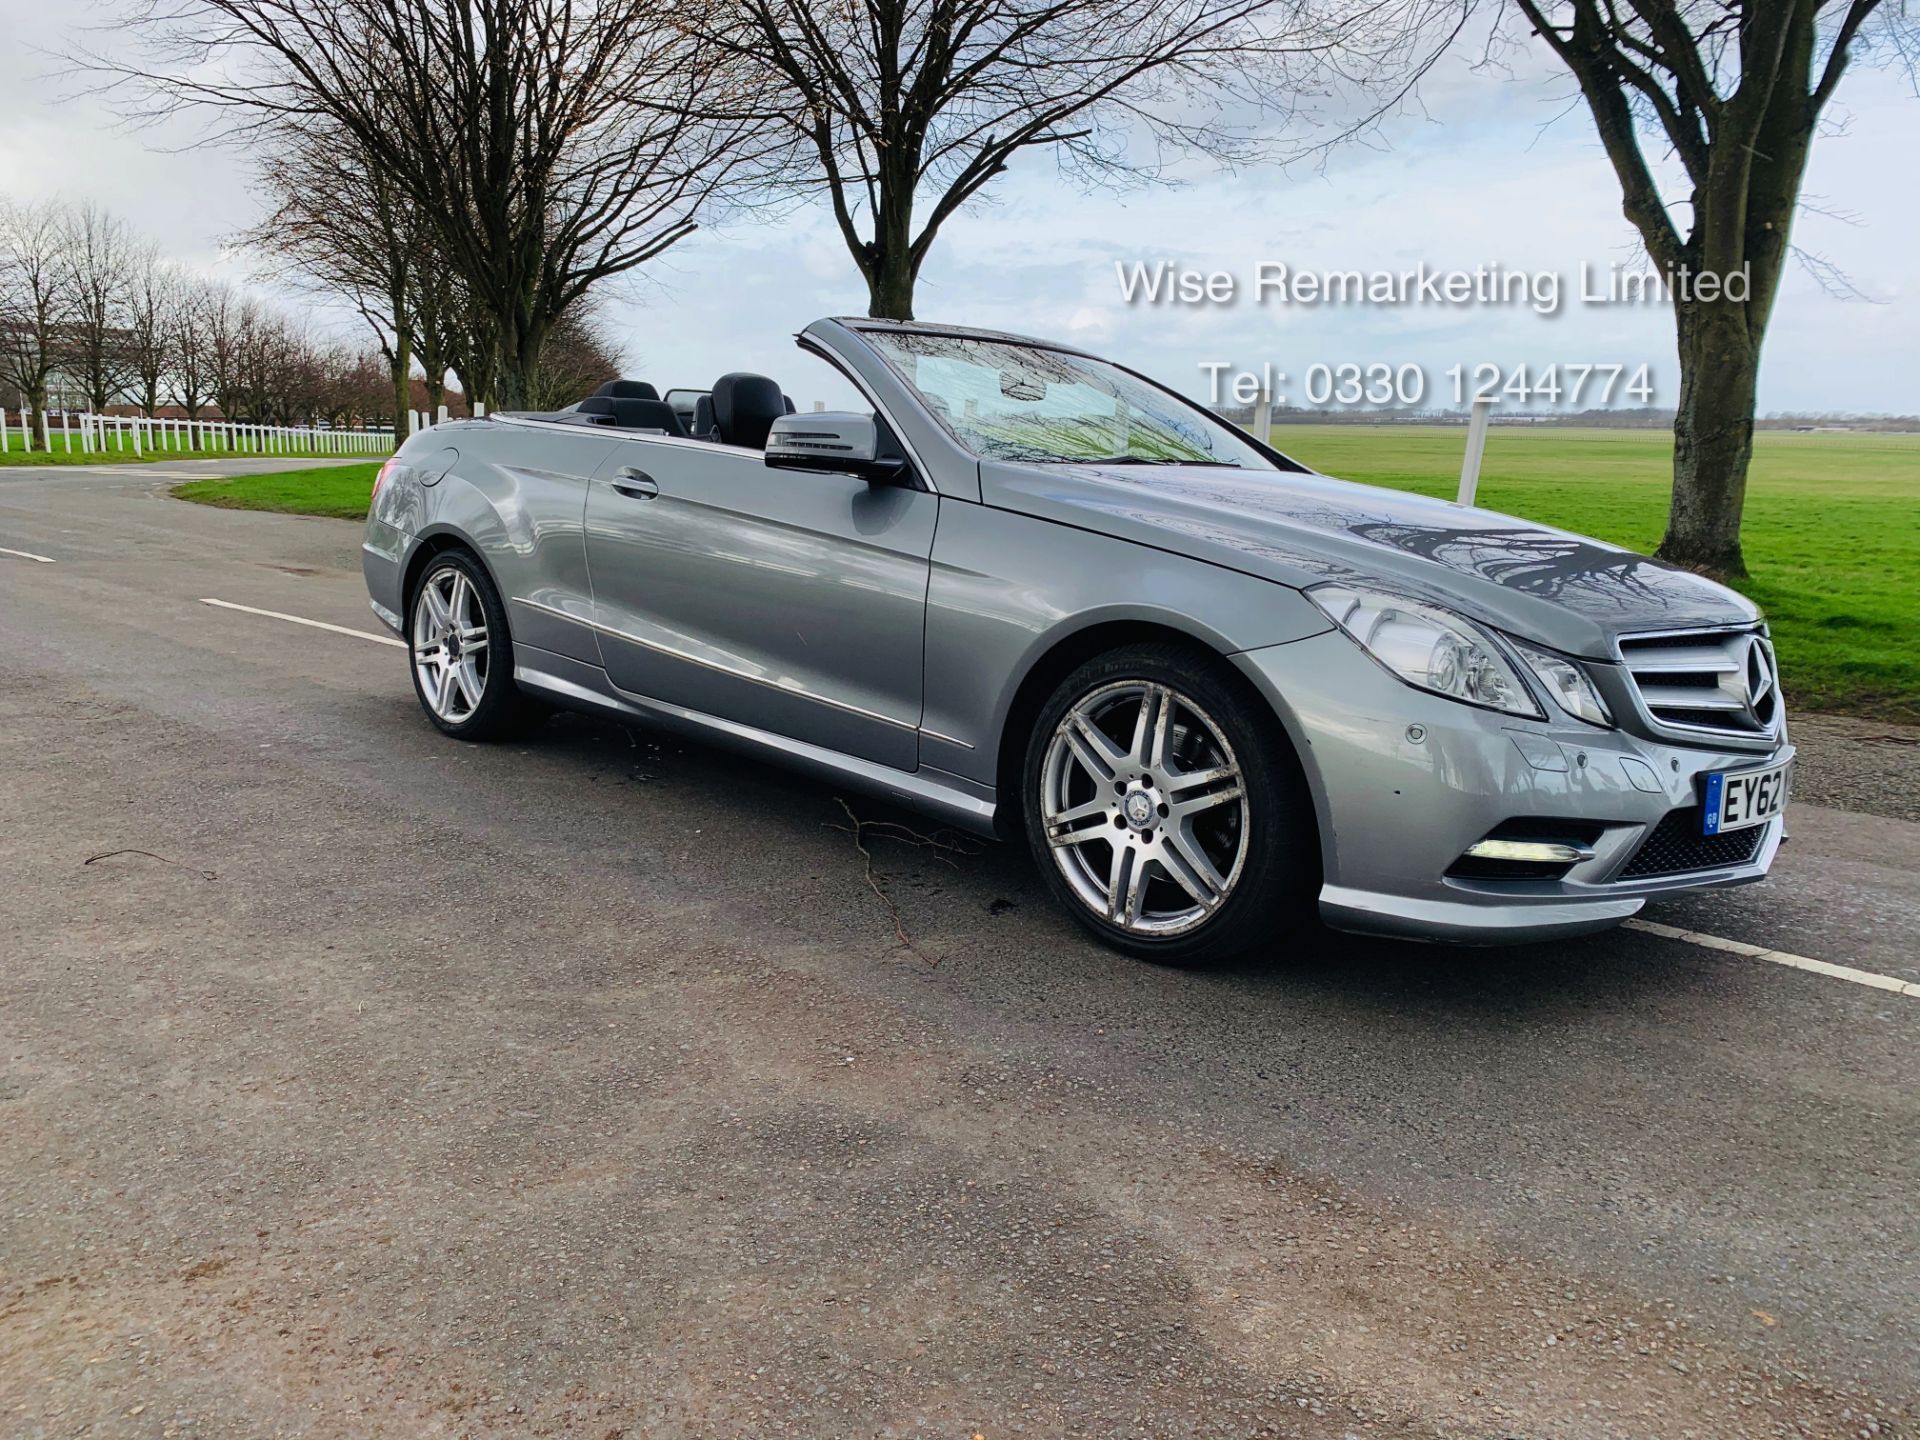 Mercedes E250 CDI Convertible Sport Tip Auto - 2013 Model - Service History - Leather - Parking aid - Image 9 of 27